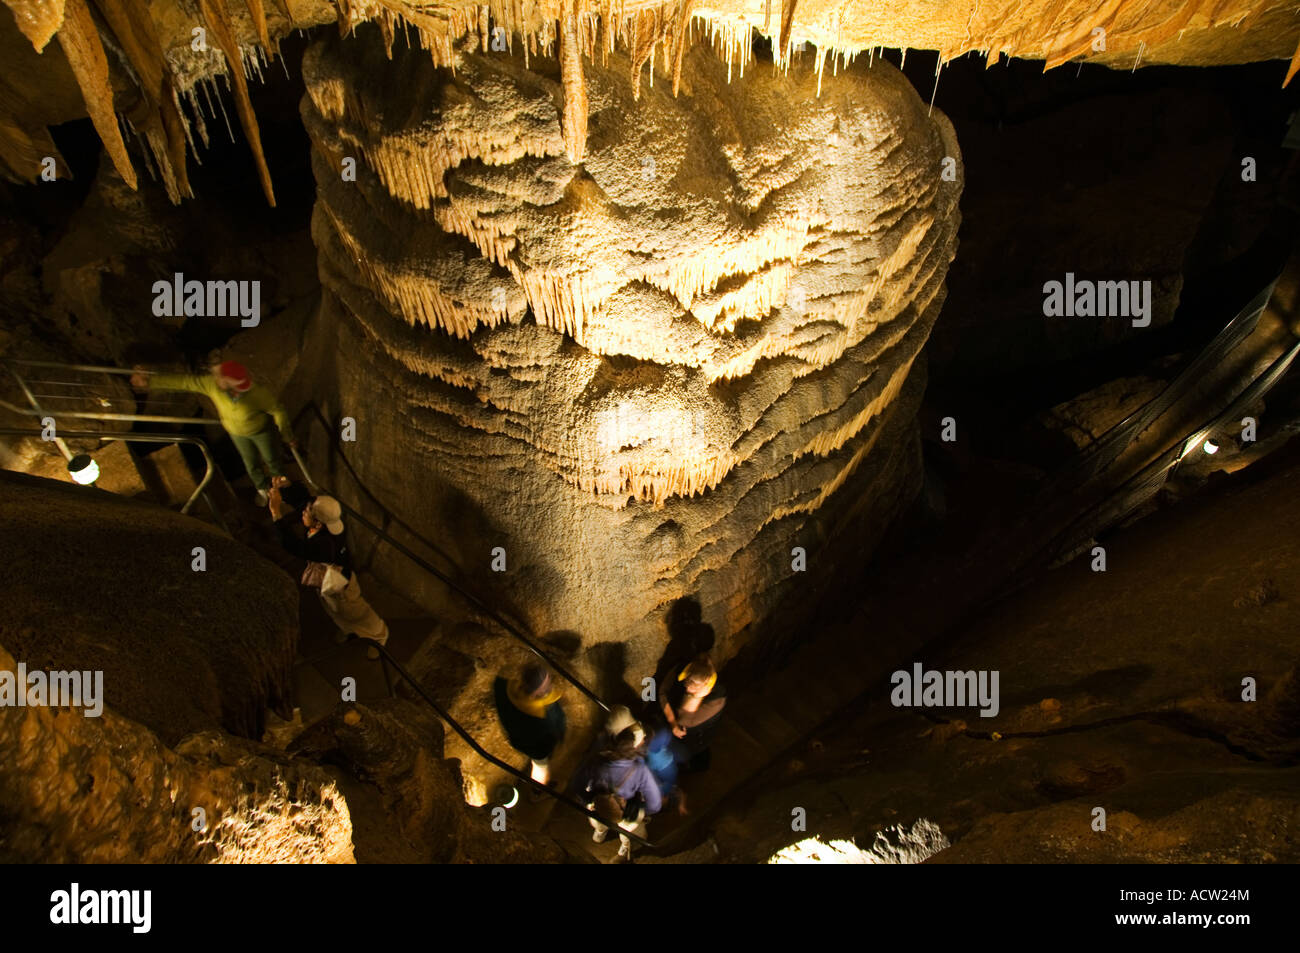 Australia State of Tasmania Gunns Plains Cave Limestone Stalactite and Stalagmite Formations visited by Tourists Stock Photo